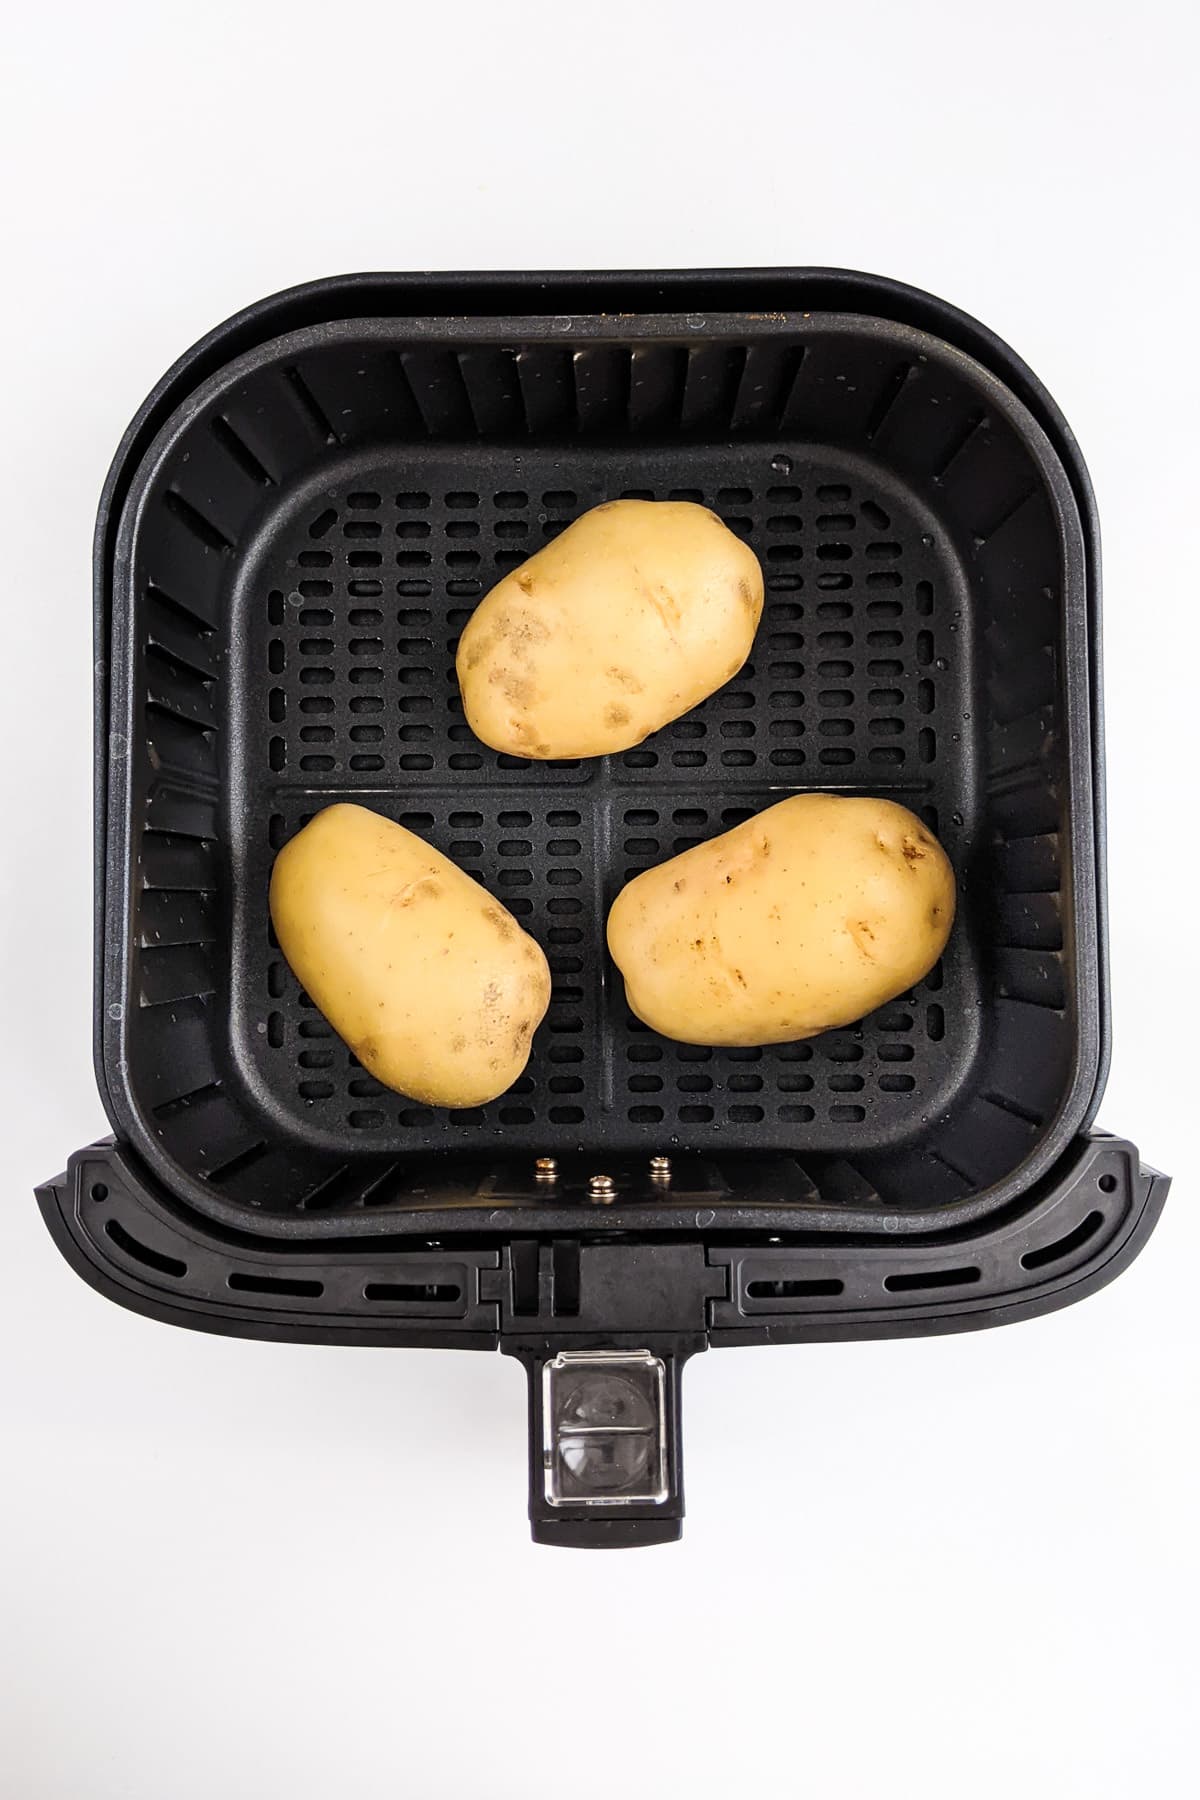 Top view of three potatoes in the air fryer basket.